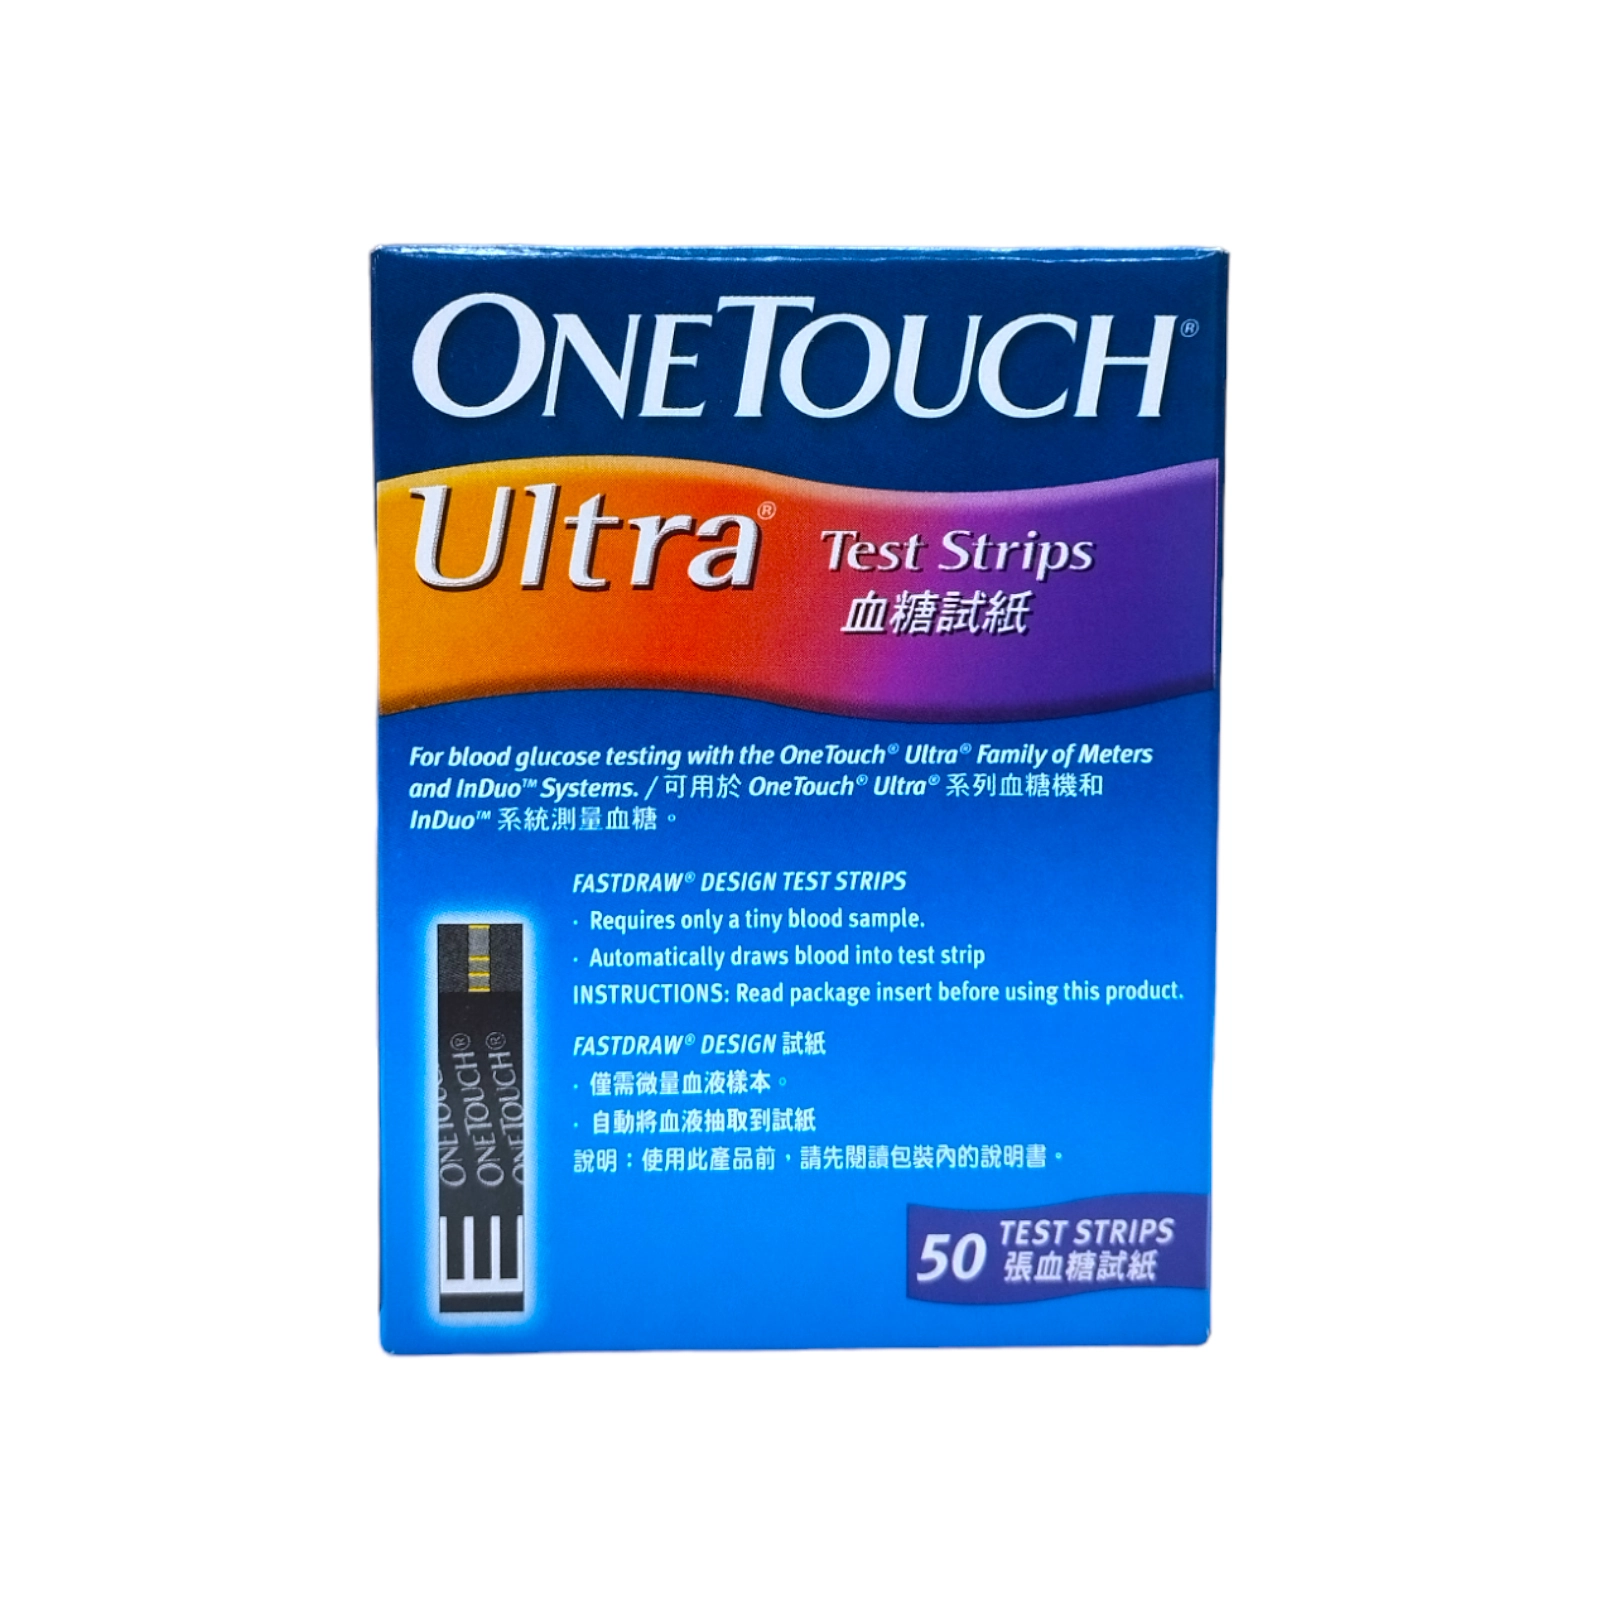 OneTouch Ultra Blood Glucose Test strips